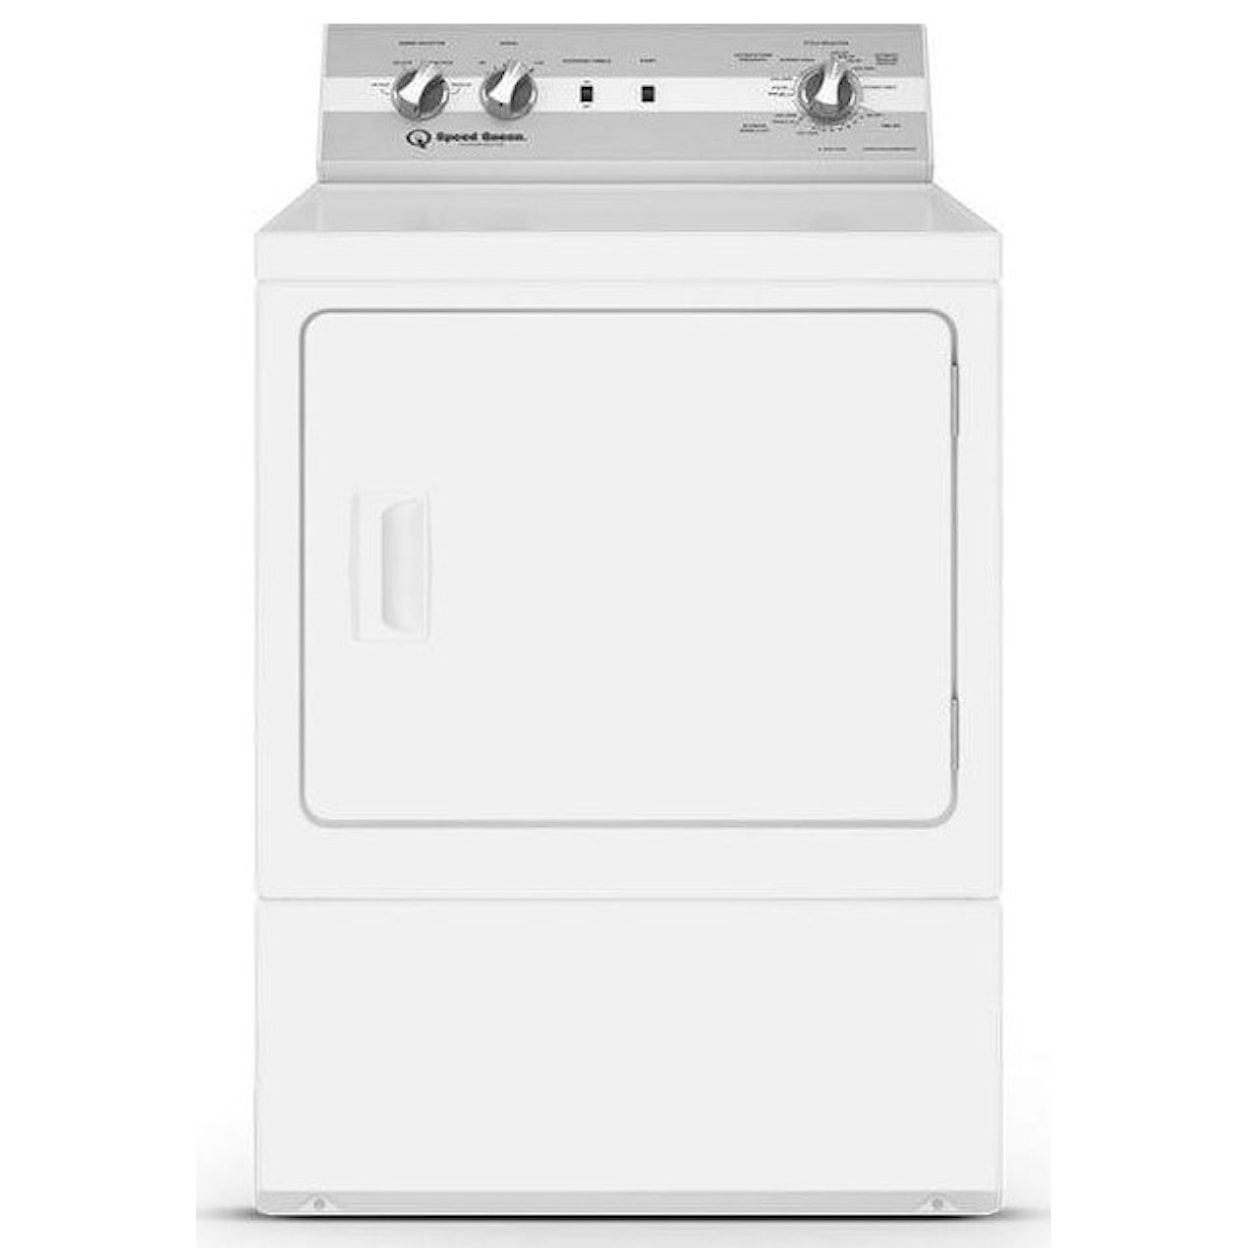 Speed Queen Electric Dryers DC5 Sanitizing Electric Dryer